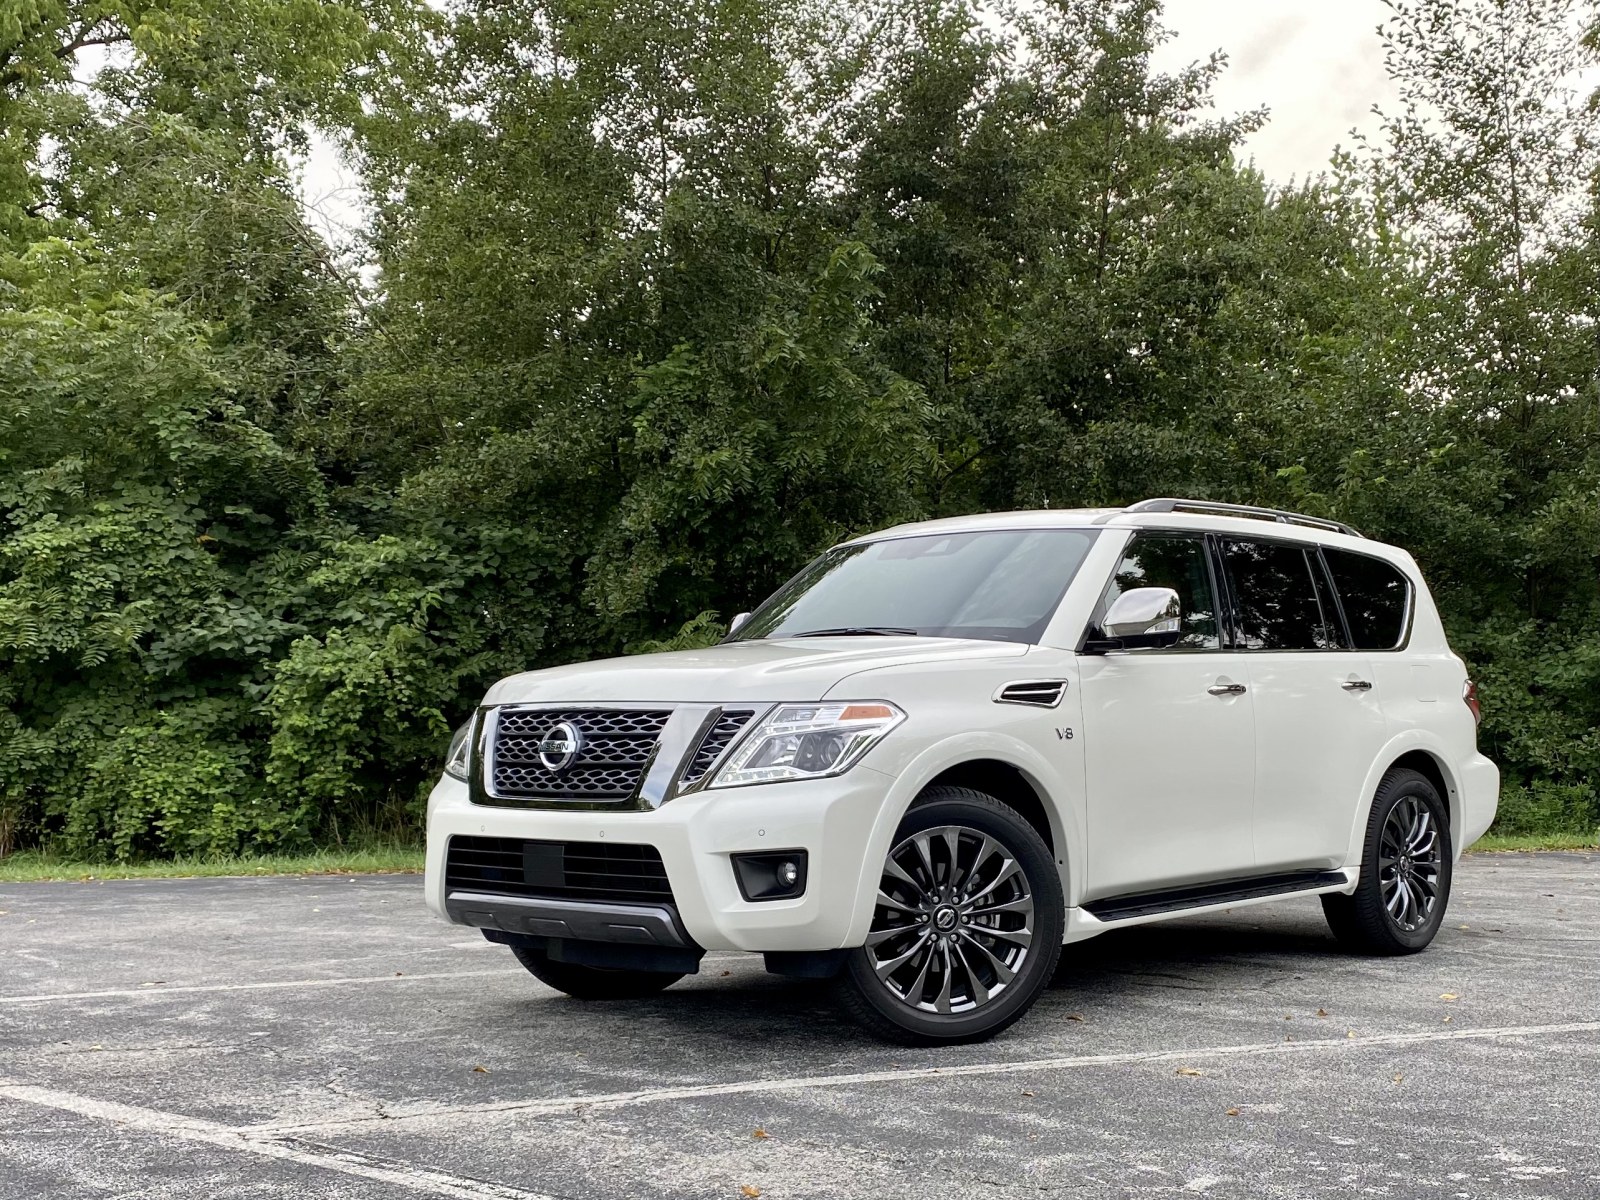 2020 Nissan Armada Prices, Reviews, and Photos - MotorTrend